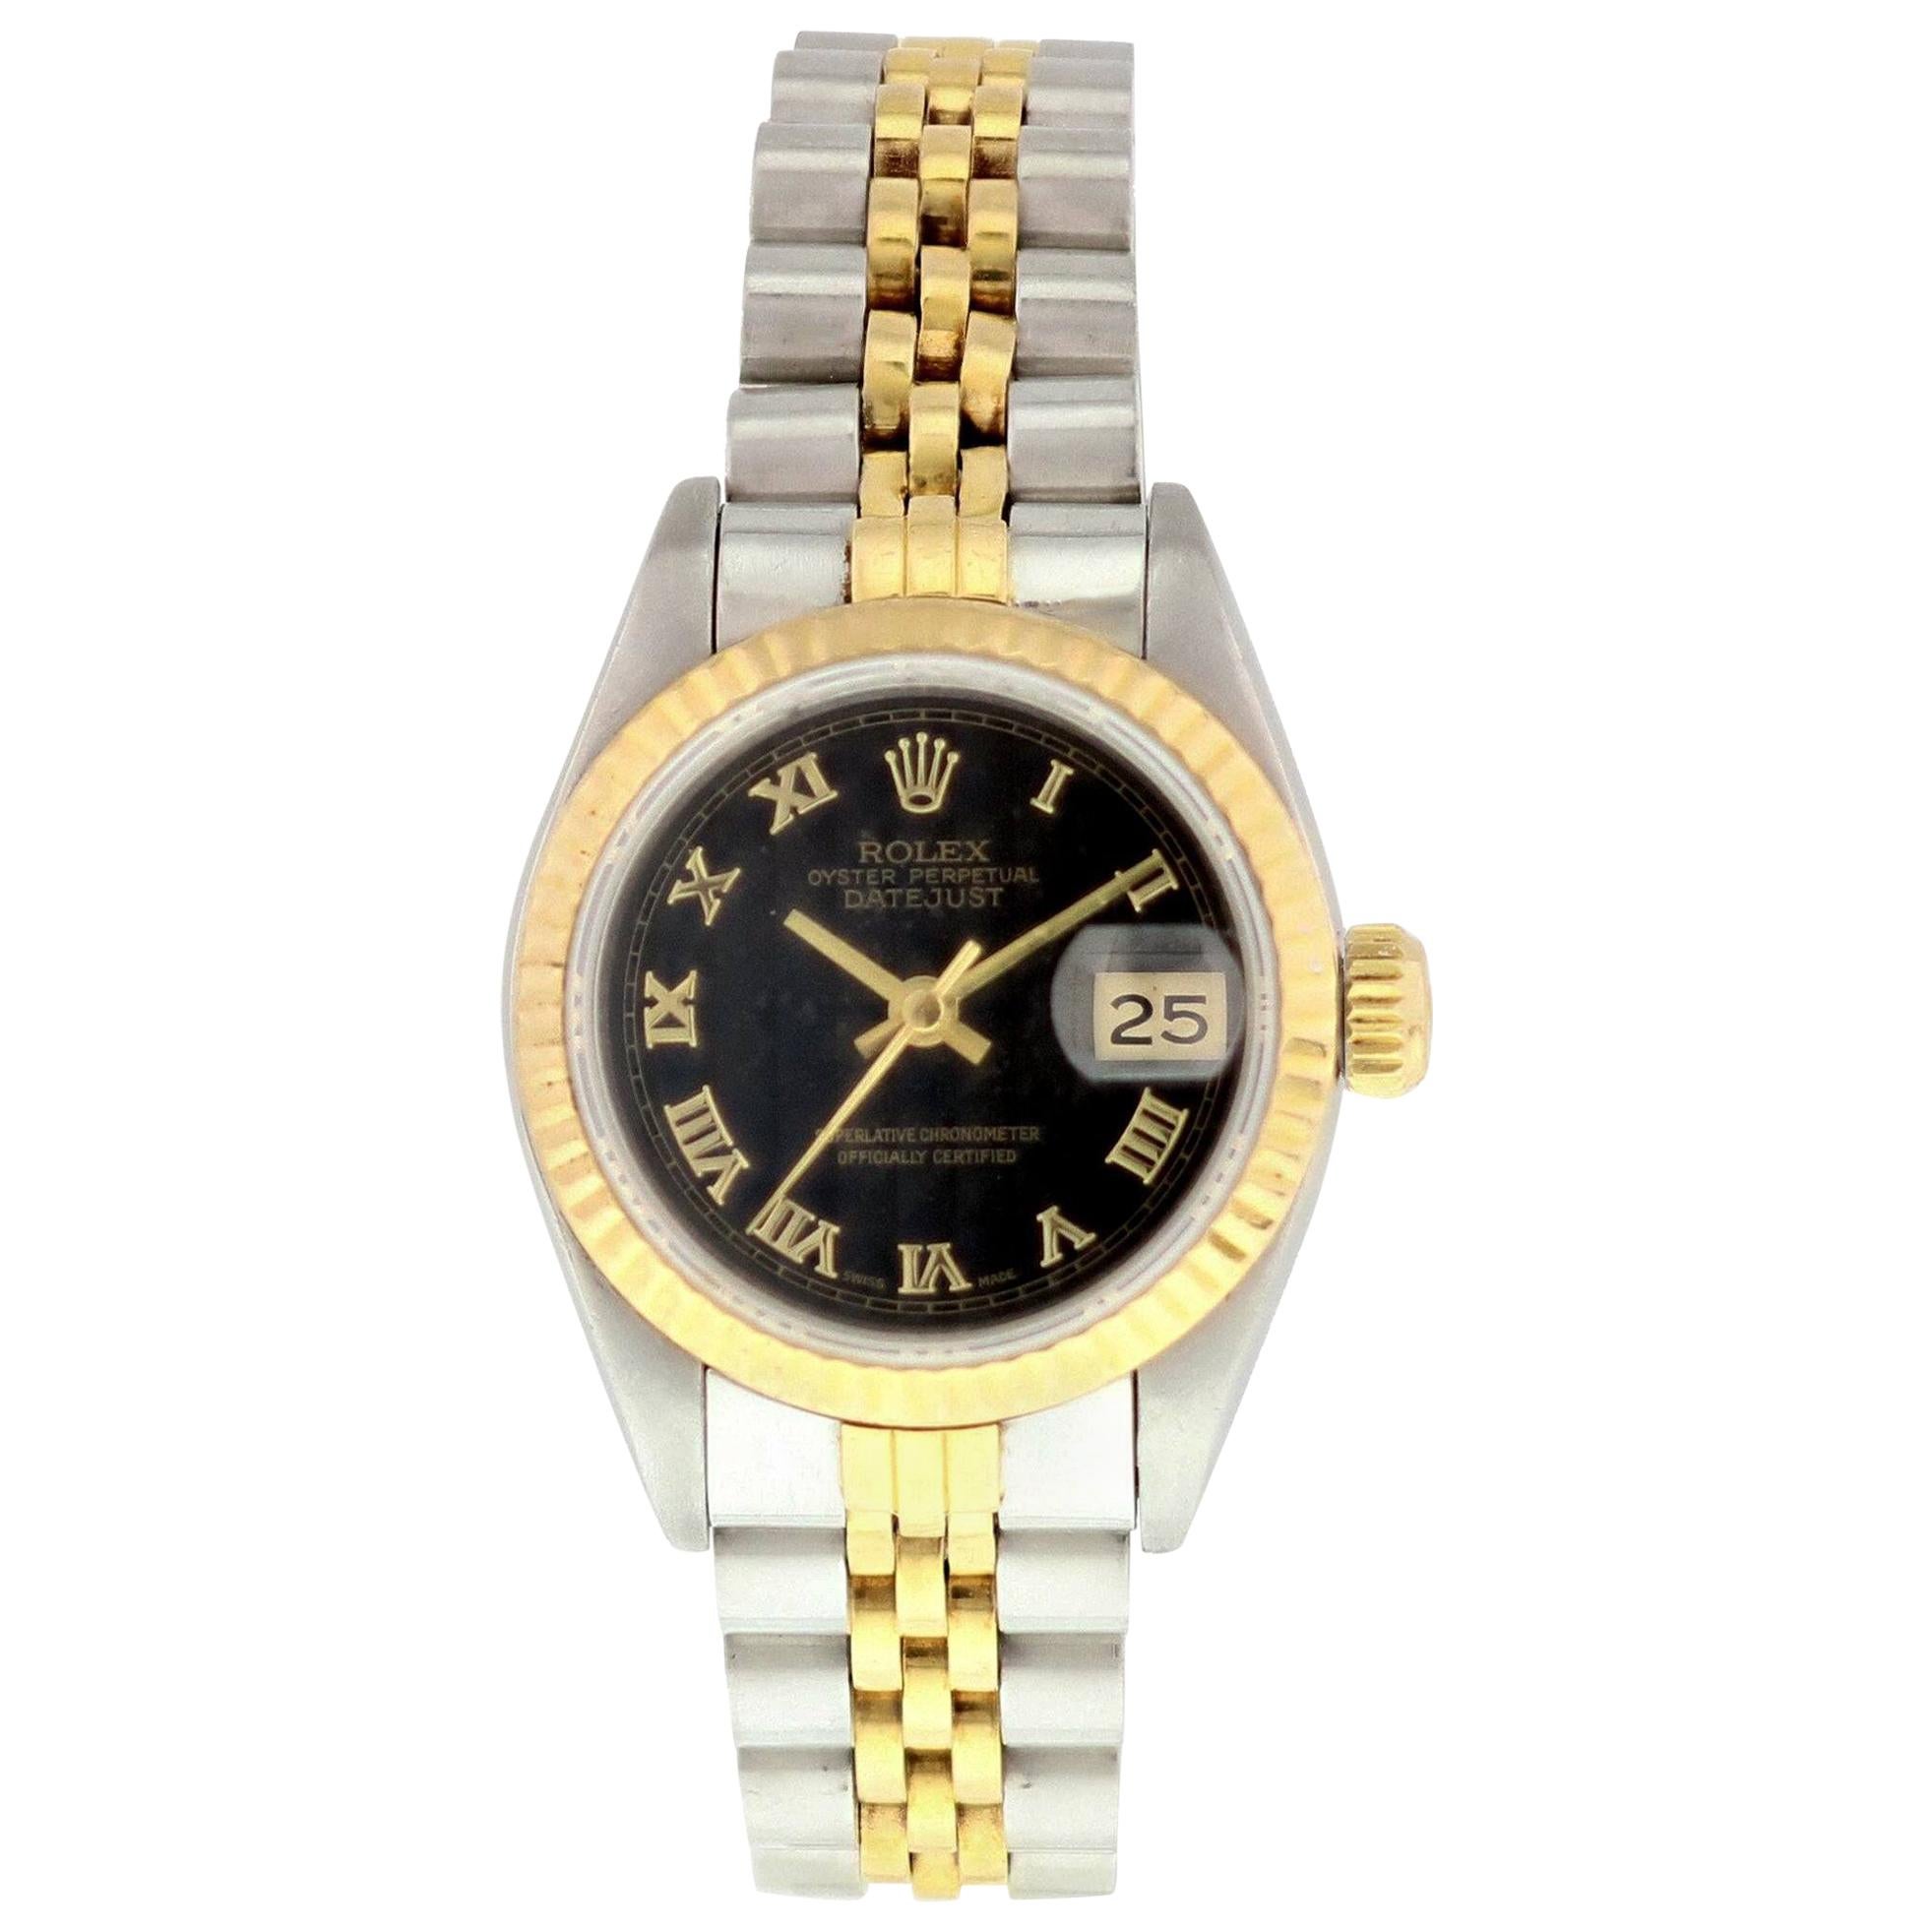 Rolex Datejust 69173 Pyramid Dial Ladies Watch For Sale